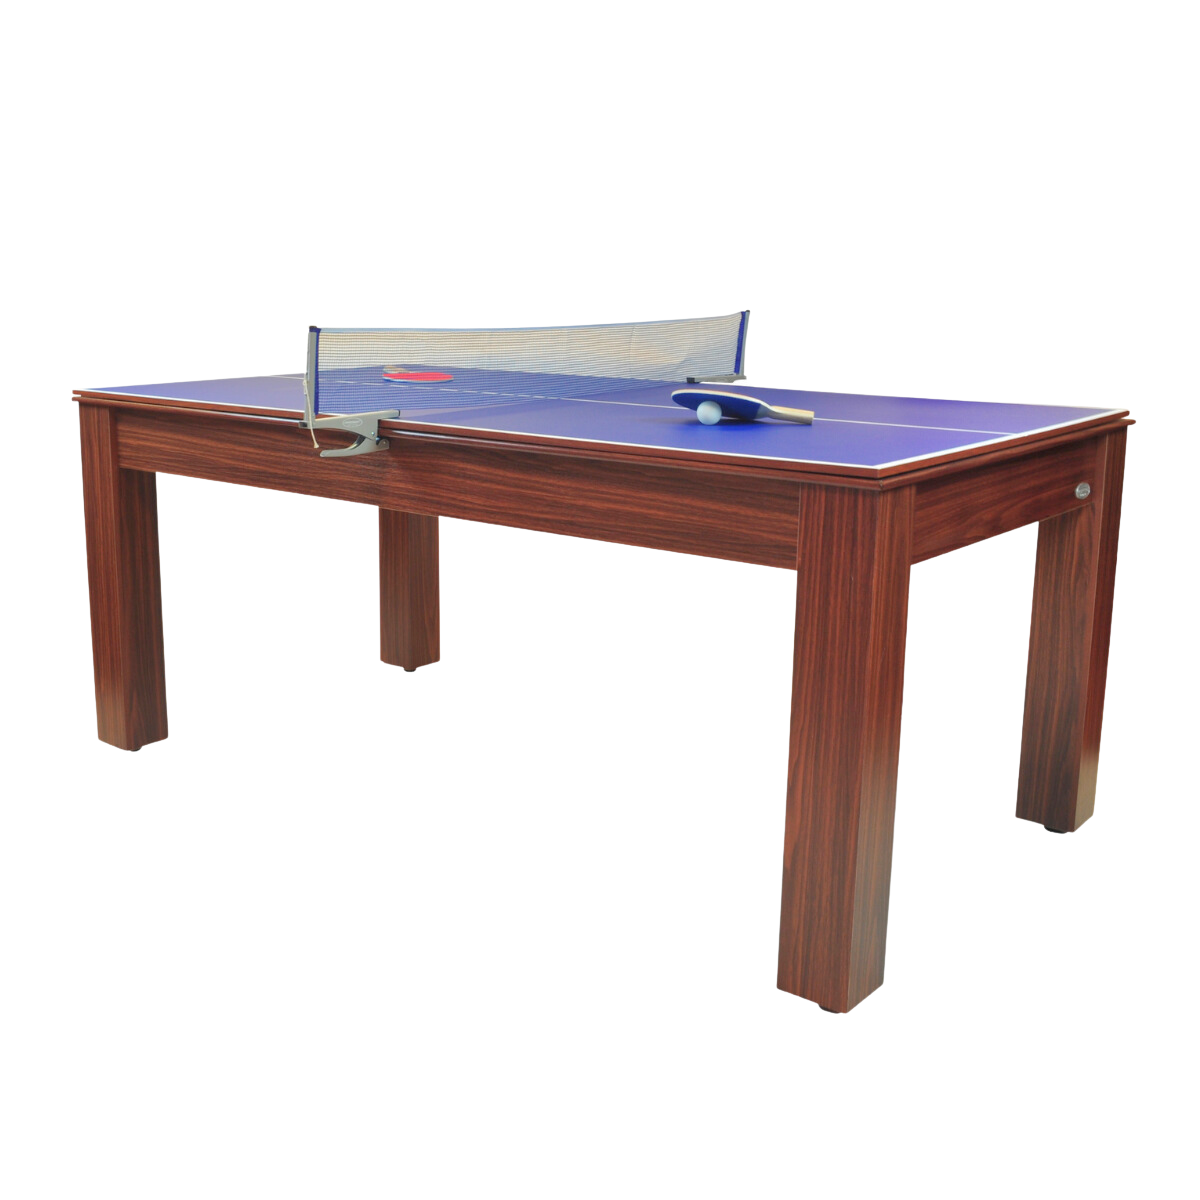 The Mars 2-in-1 6ft Pool Table